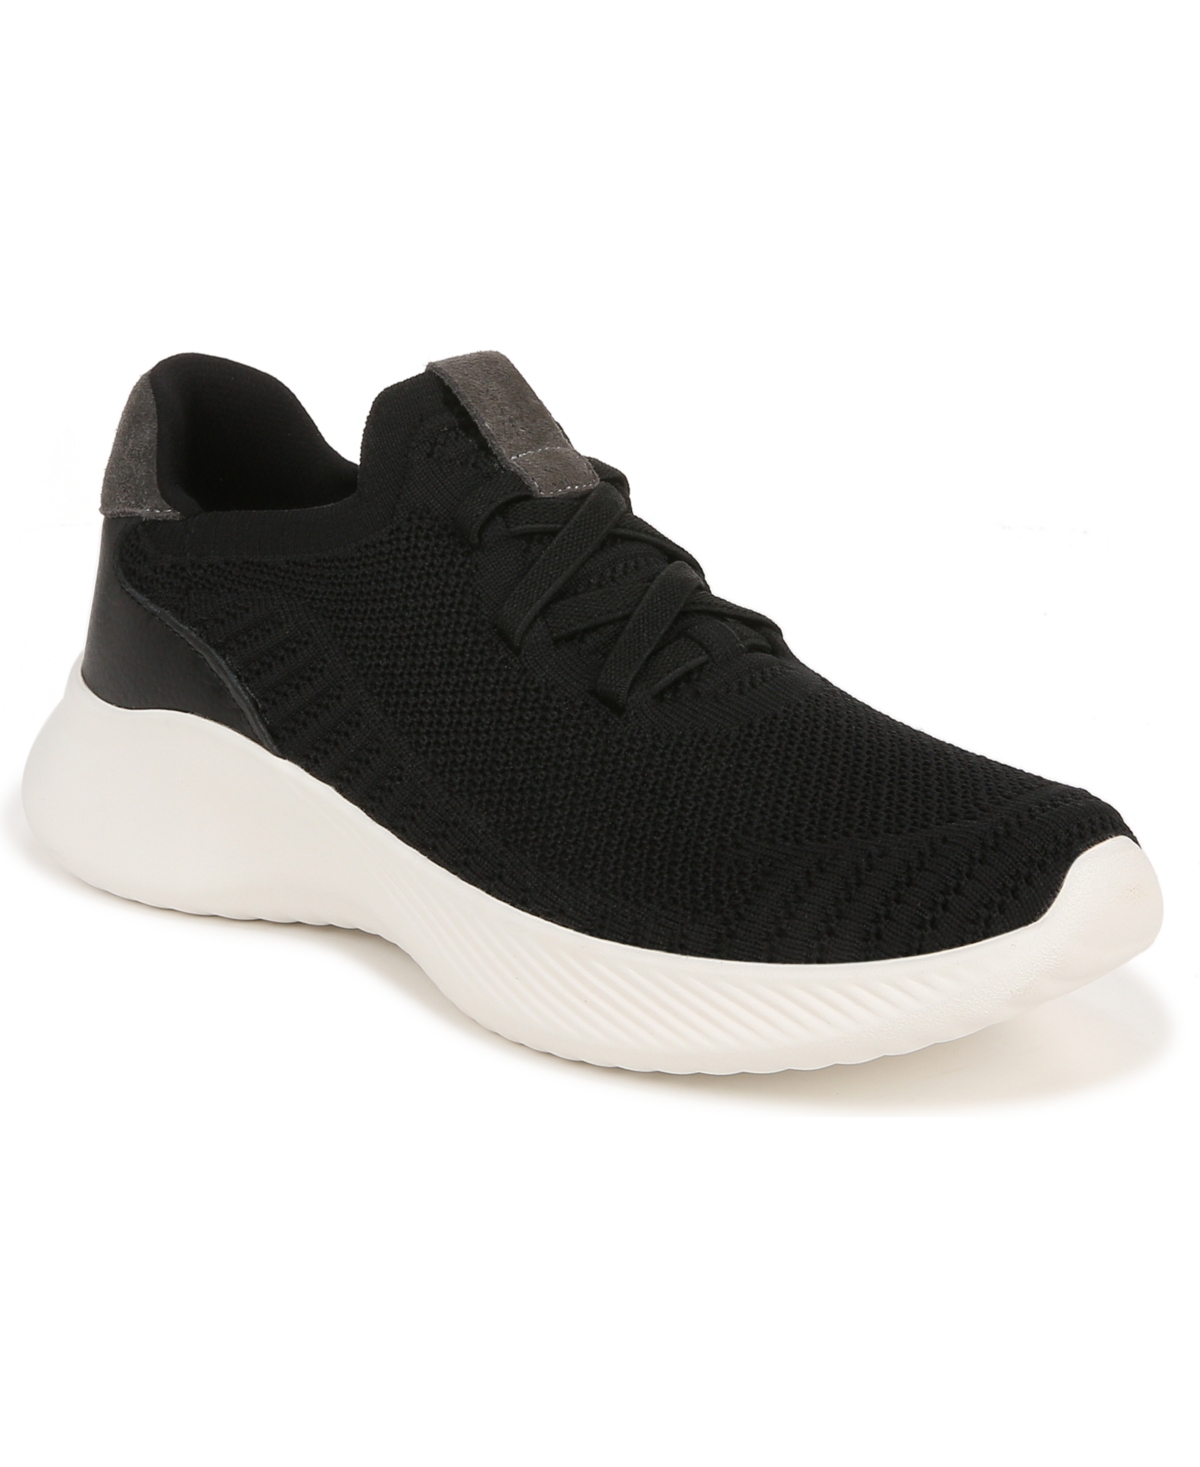 Naturalizer Emerge Slip-on Sneakers Women's Shoes